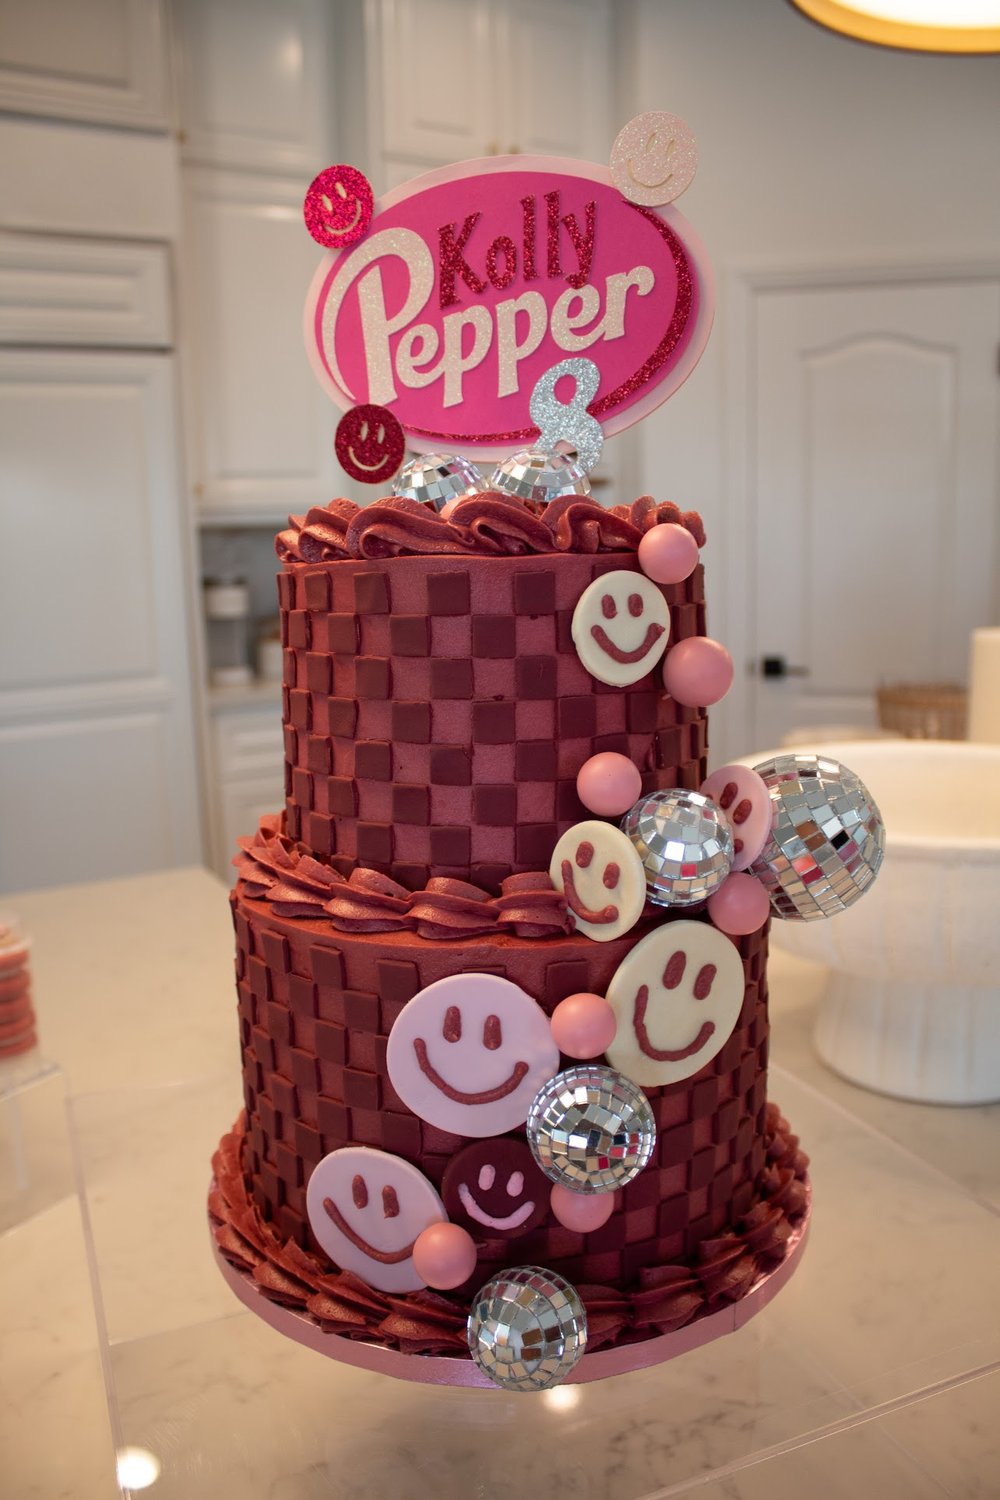 cake with smiley and Kolly Pepper topper